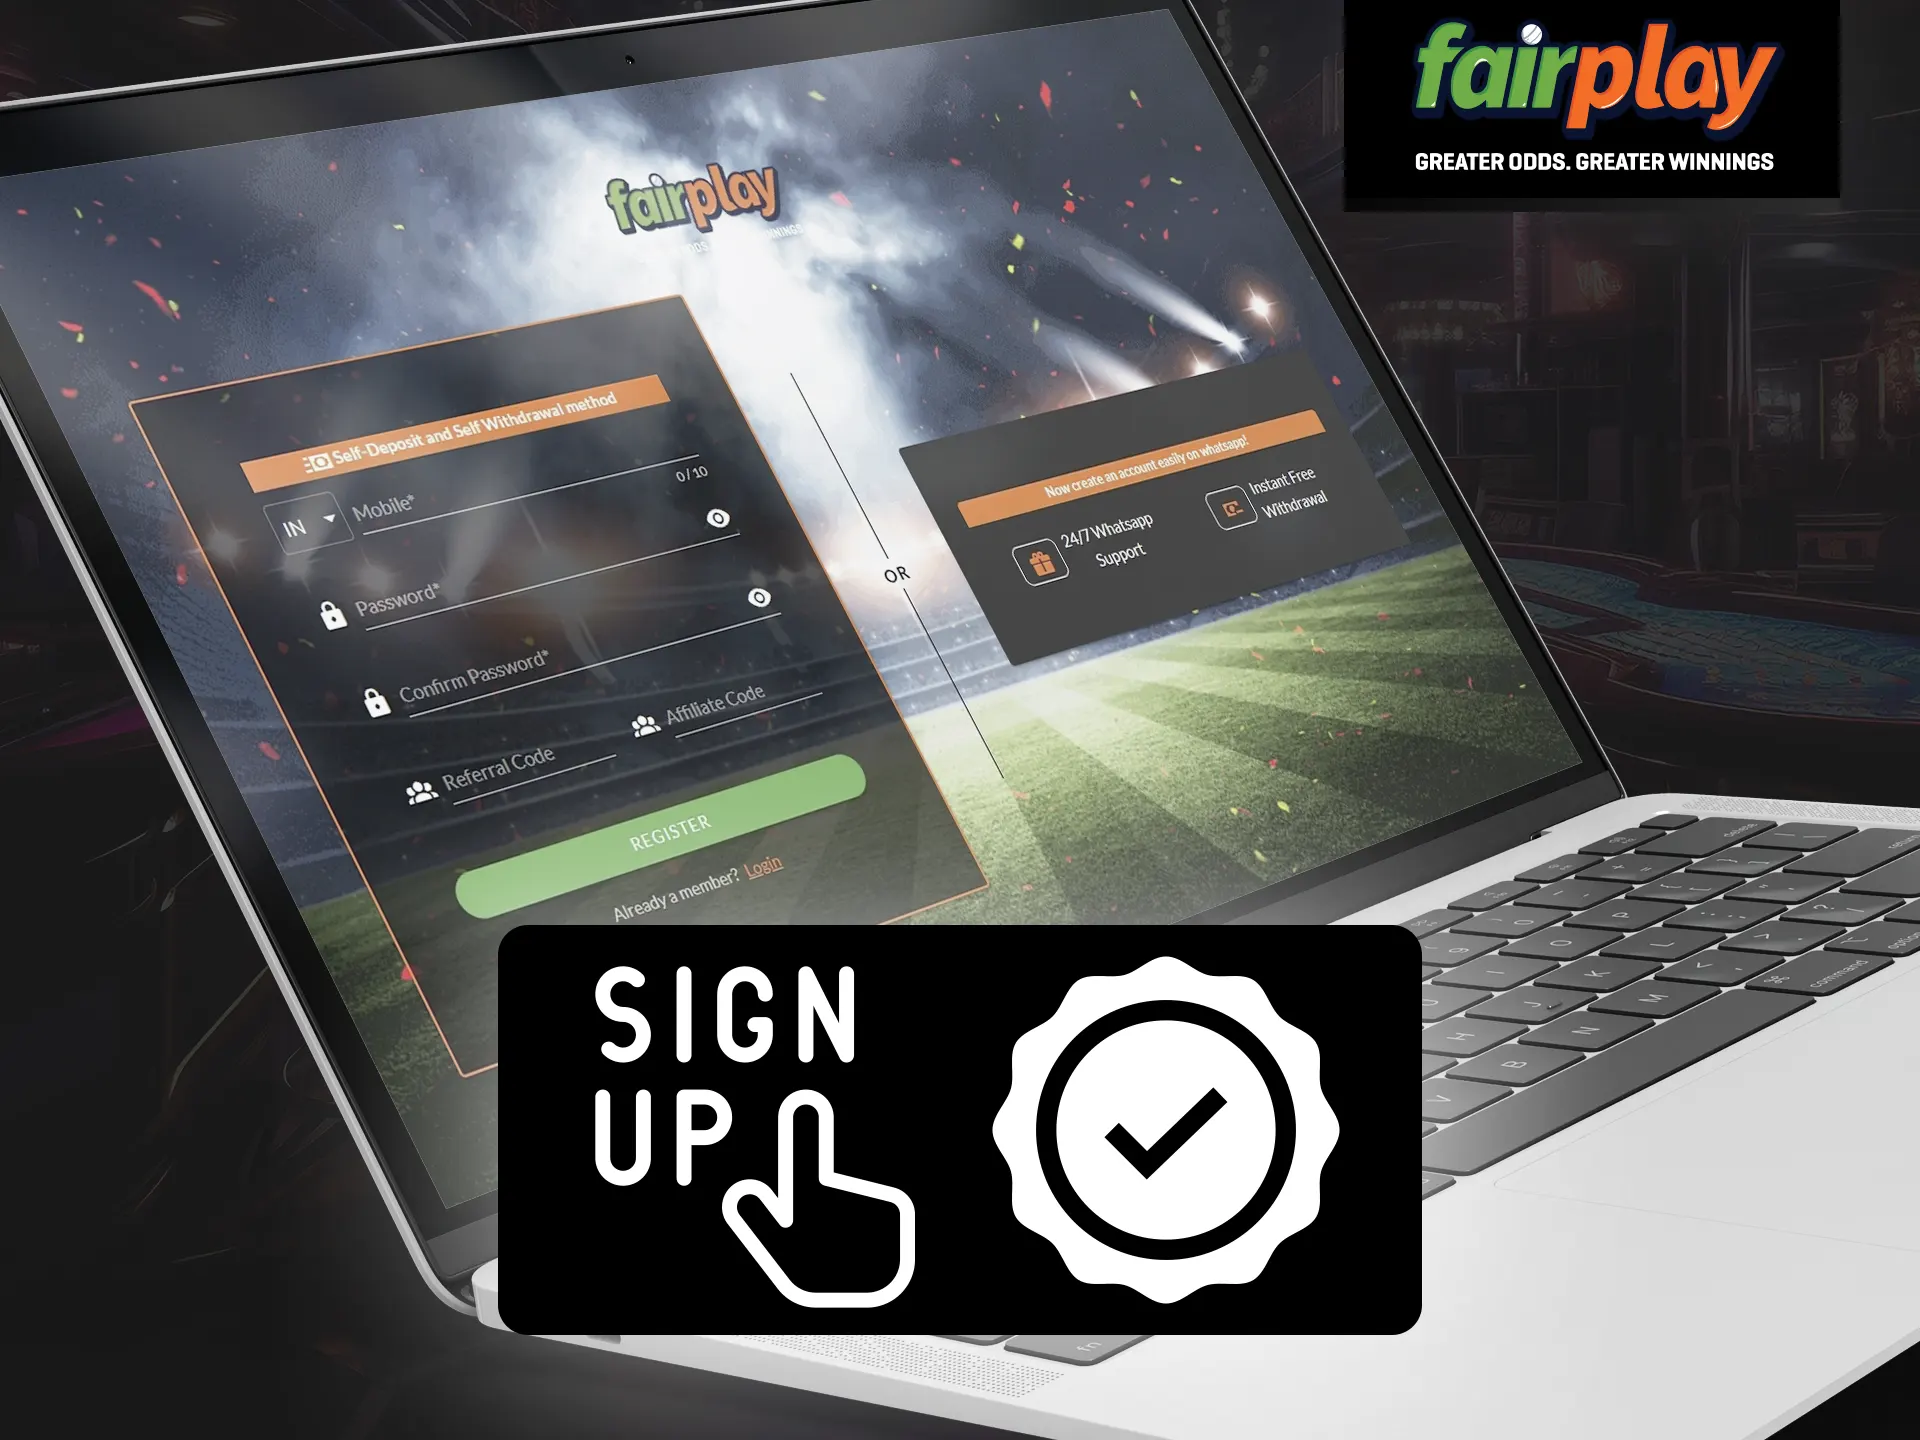 Fairplay Registration: Click Register, enter personal details and pass the verification.